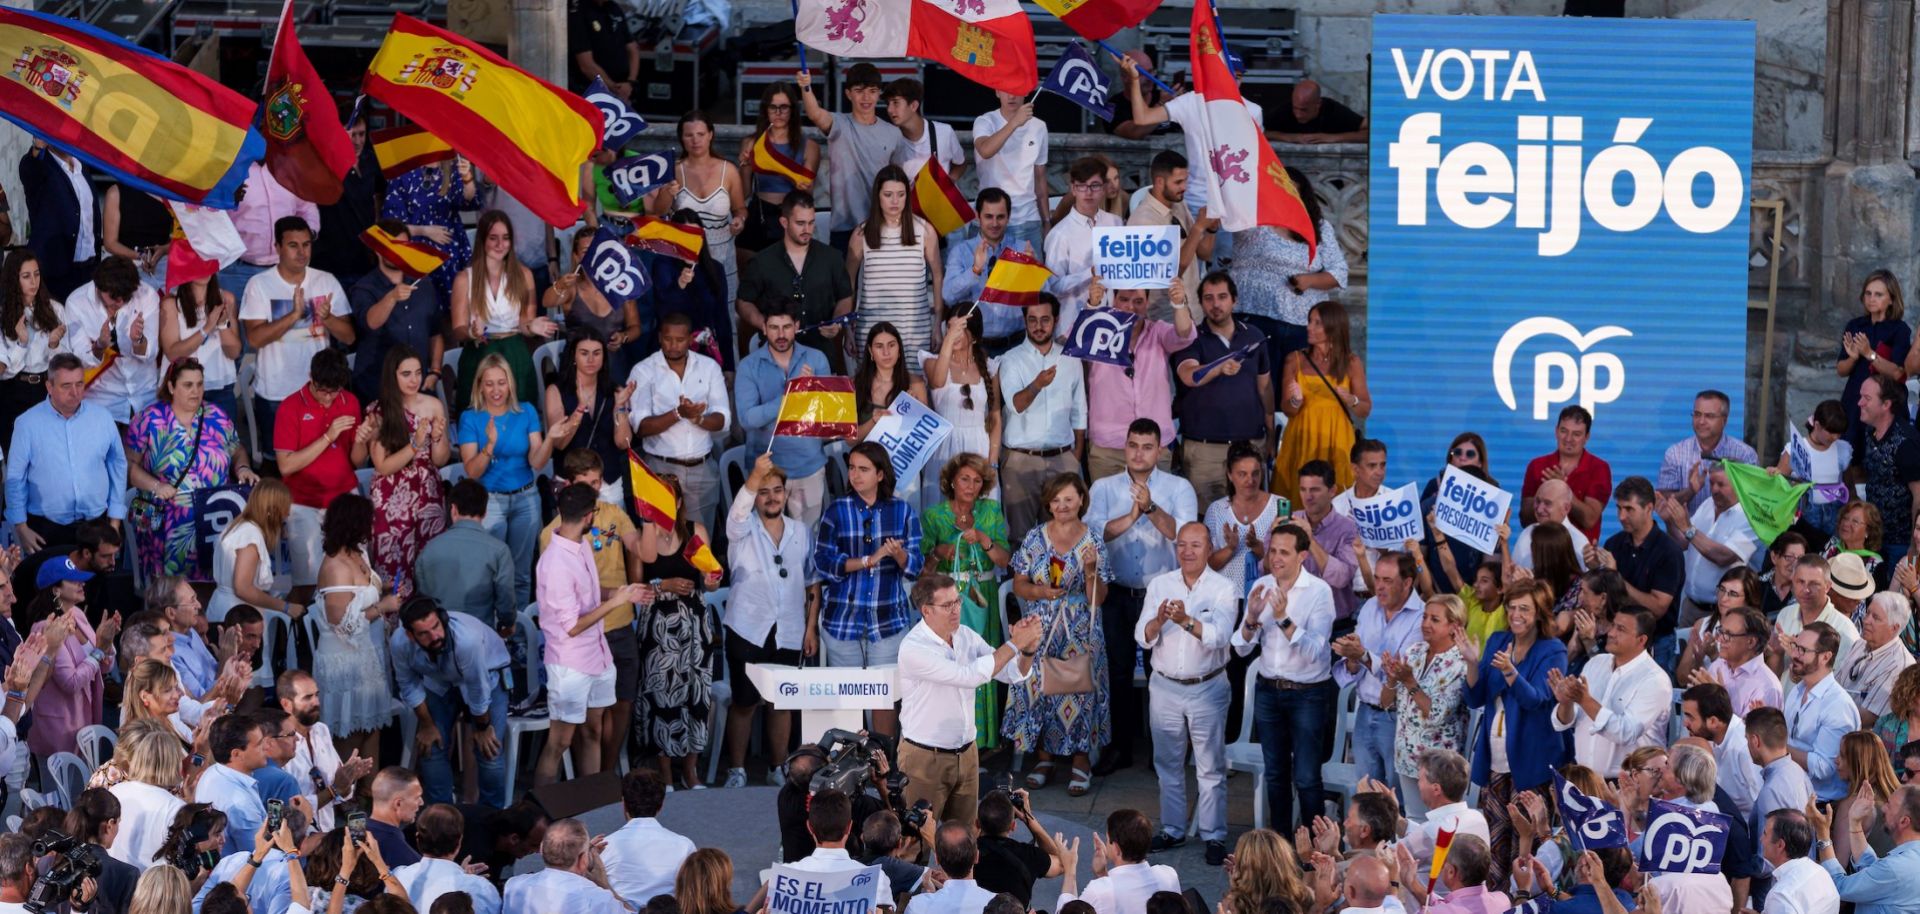 Previewing Spain's General Election